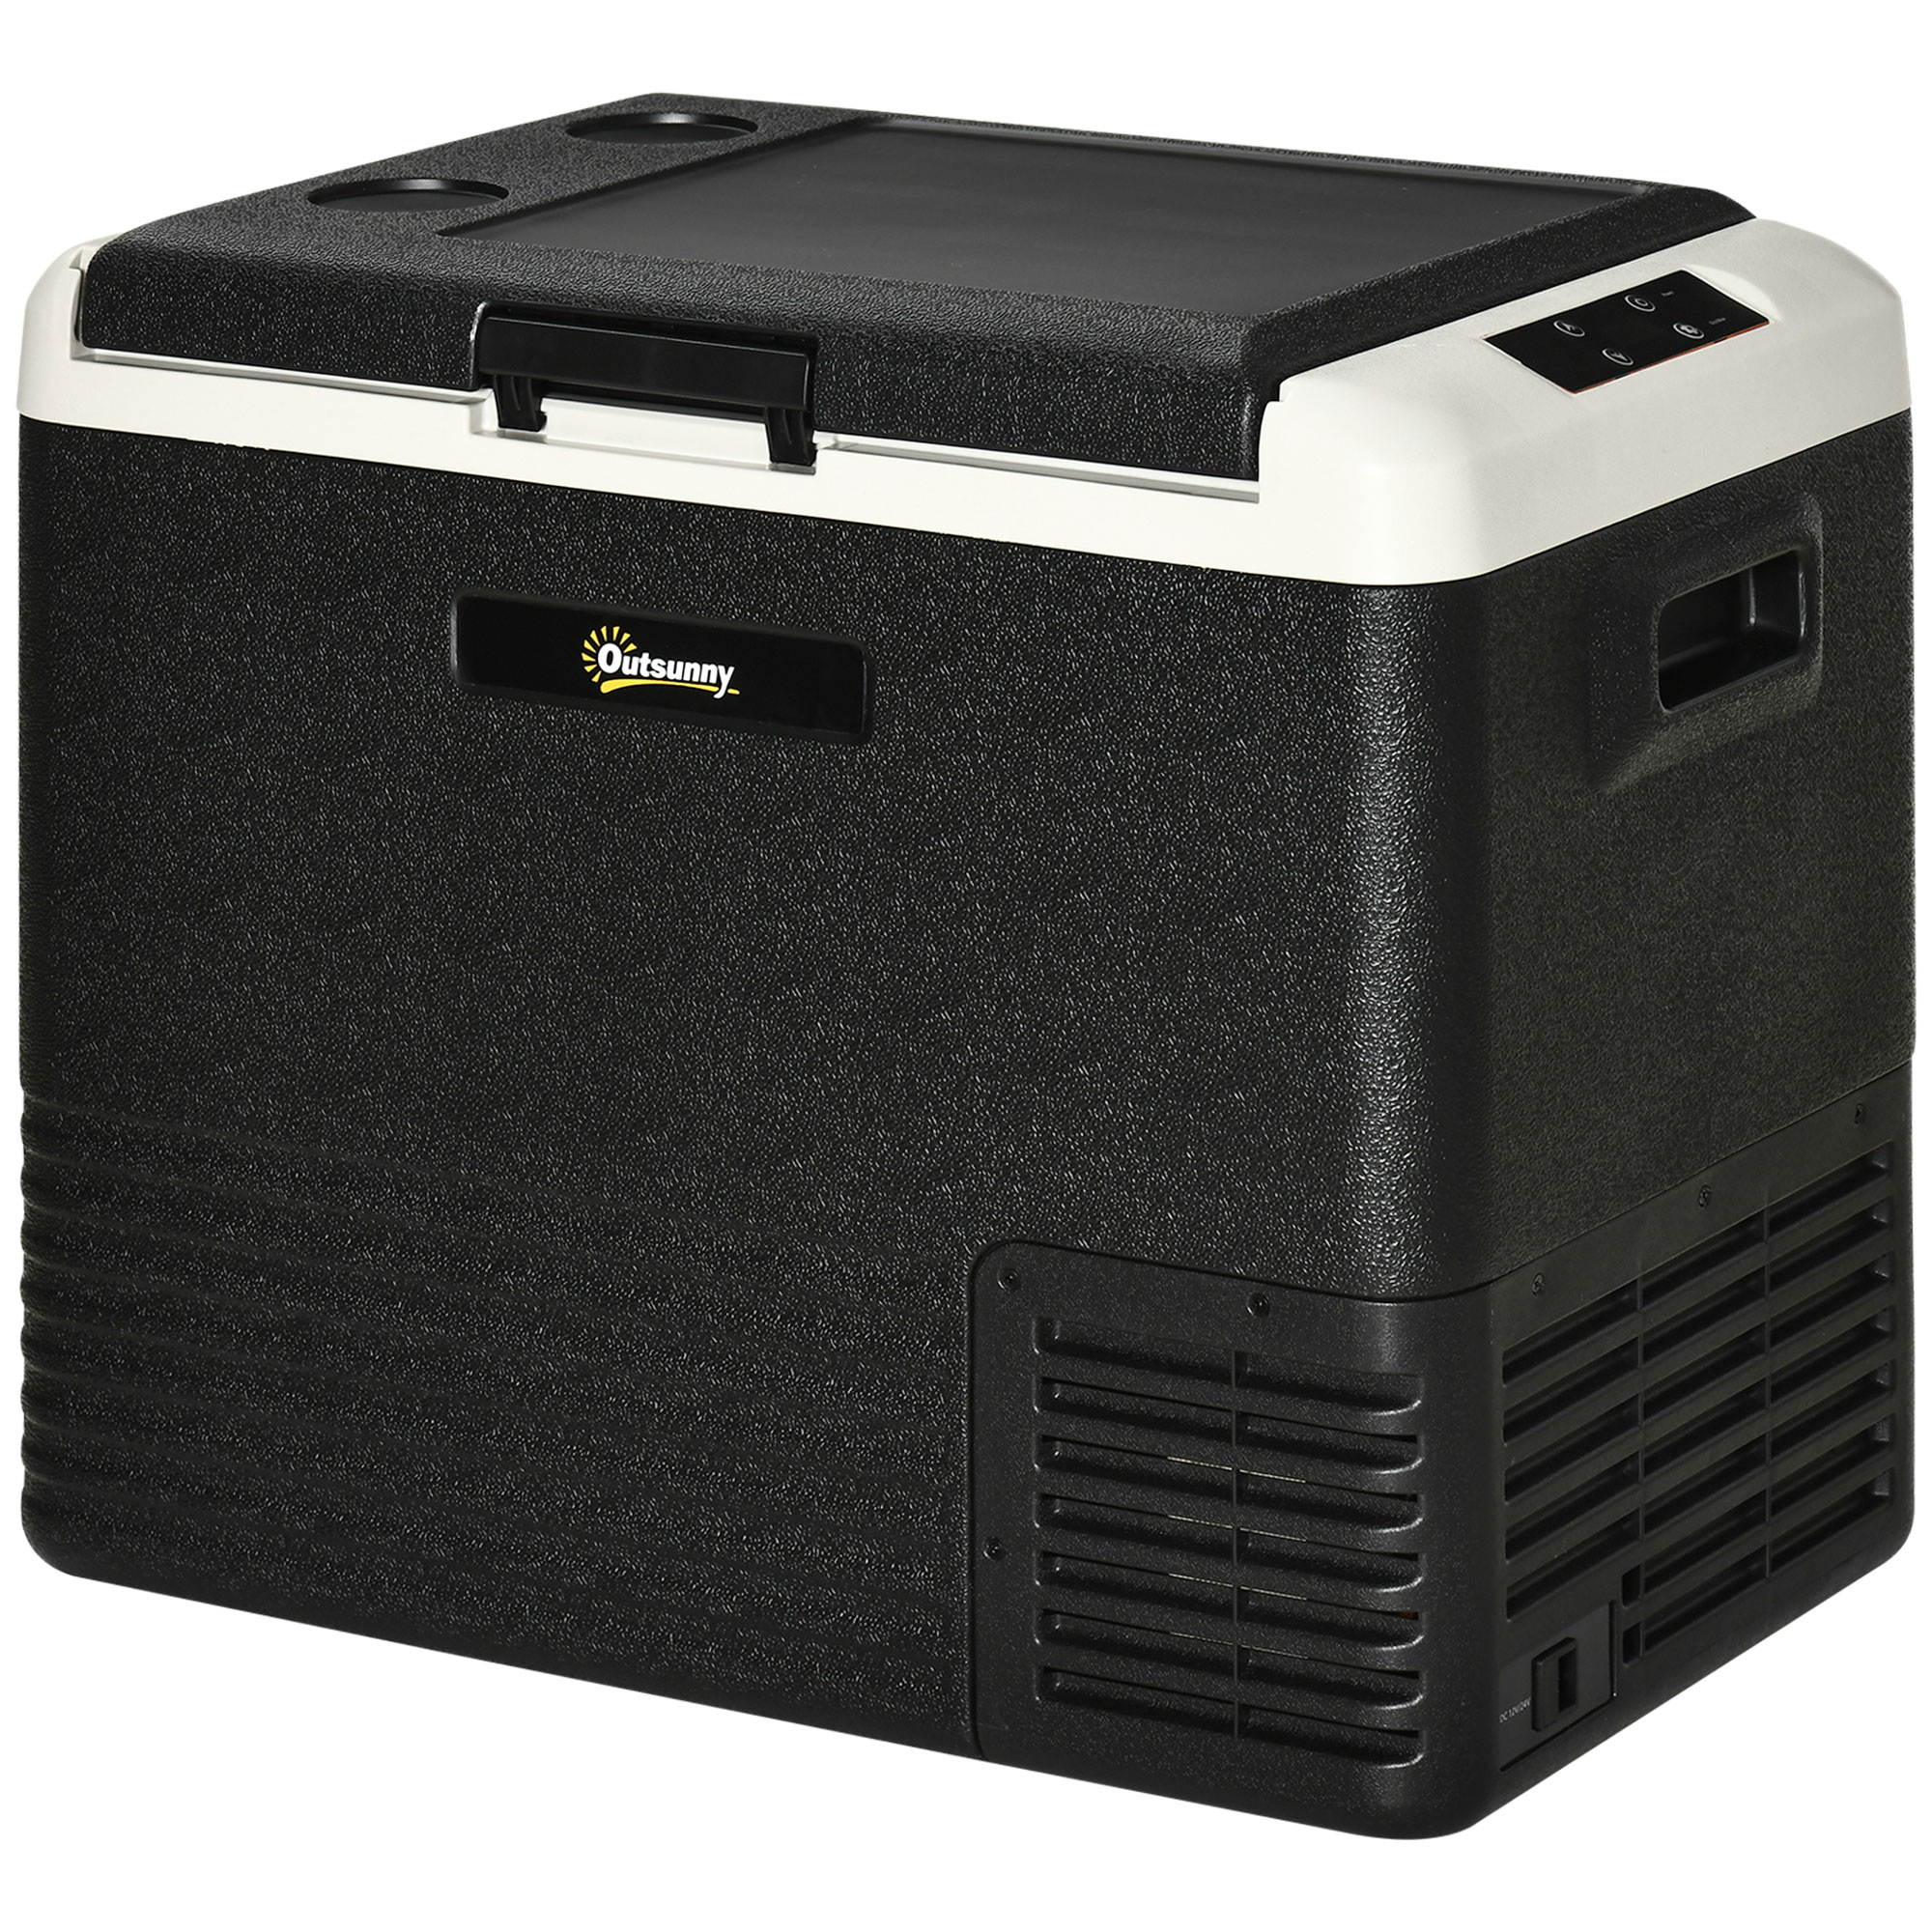 Outsunny 50l Car Refrigerator, Portable Compressor Car Fridge Freezer, Electric Cooler Box With 12/24v Dc And 110-240v Ac For Camping Down To -20℃